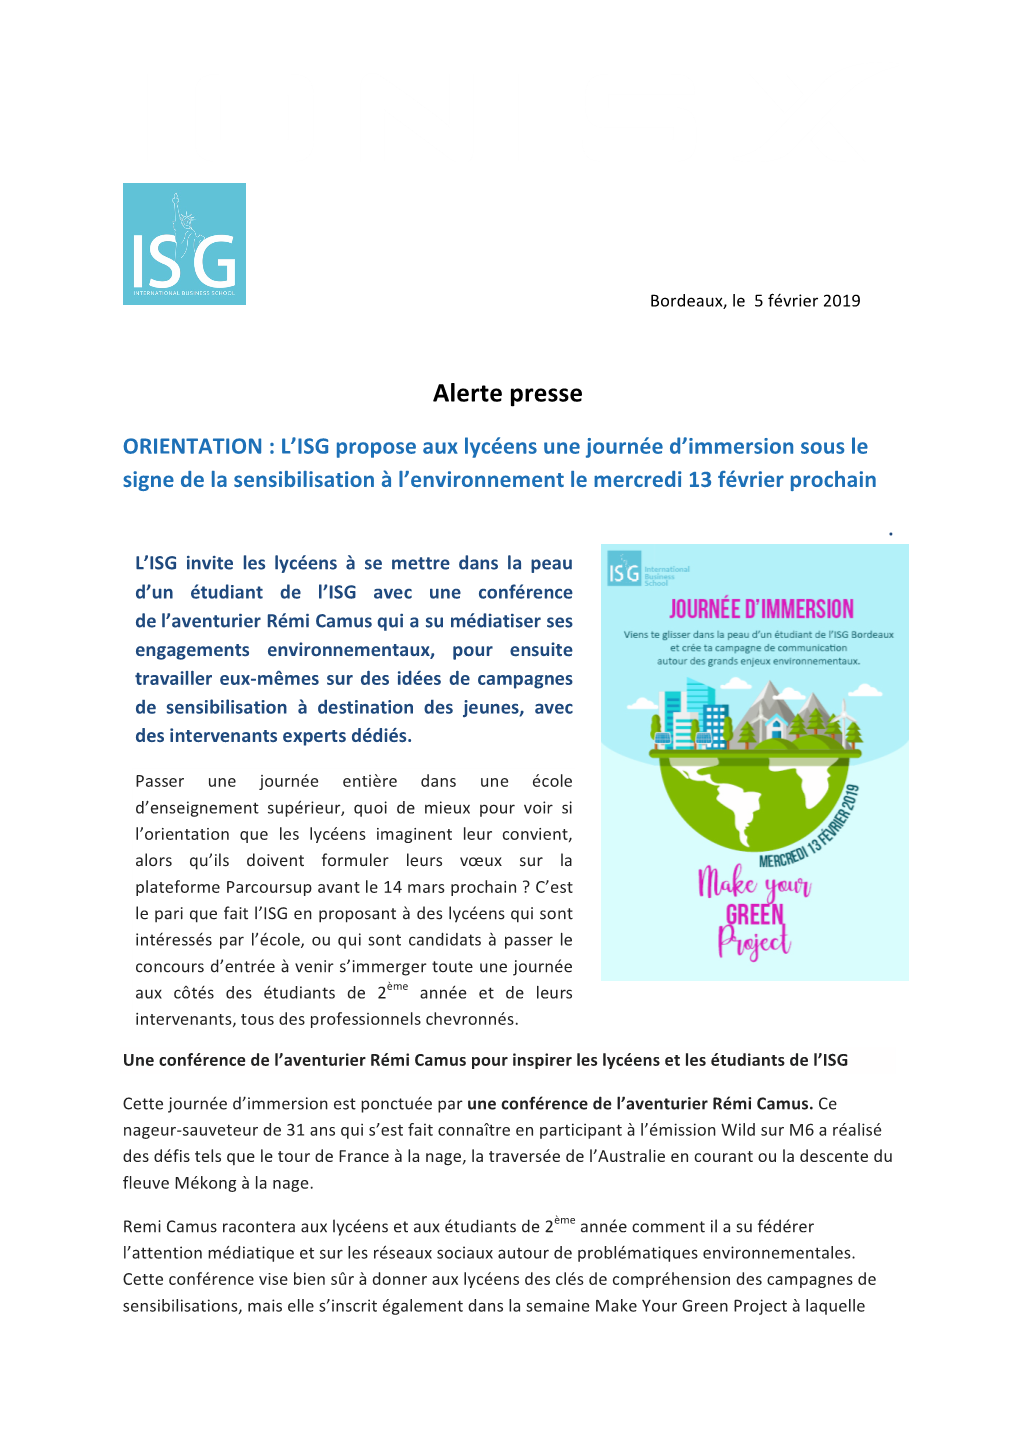 Isg-Journee-Immersion-Make-Your